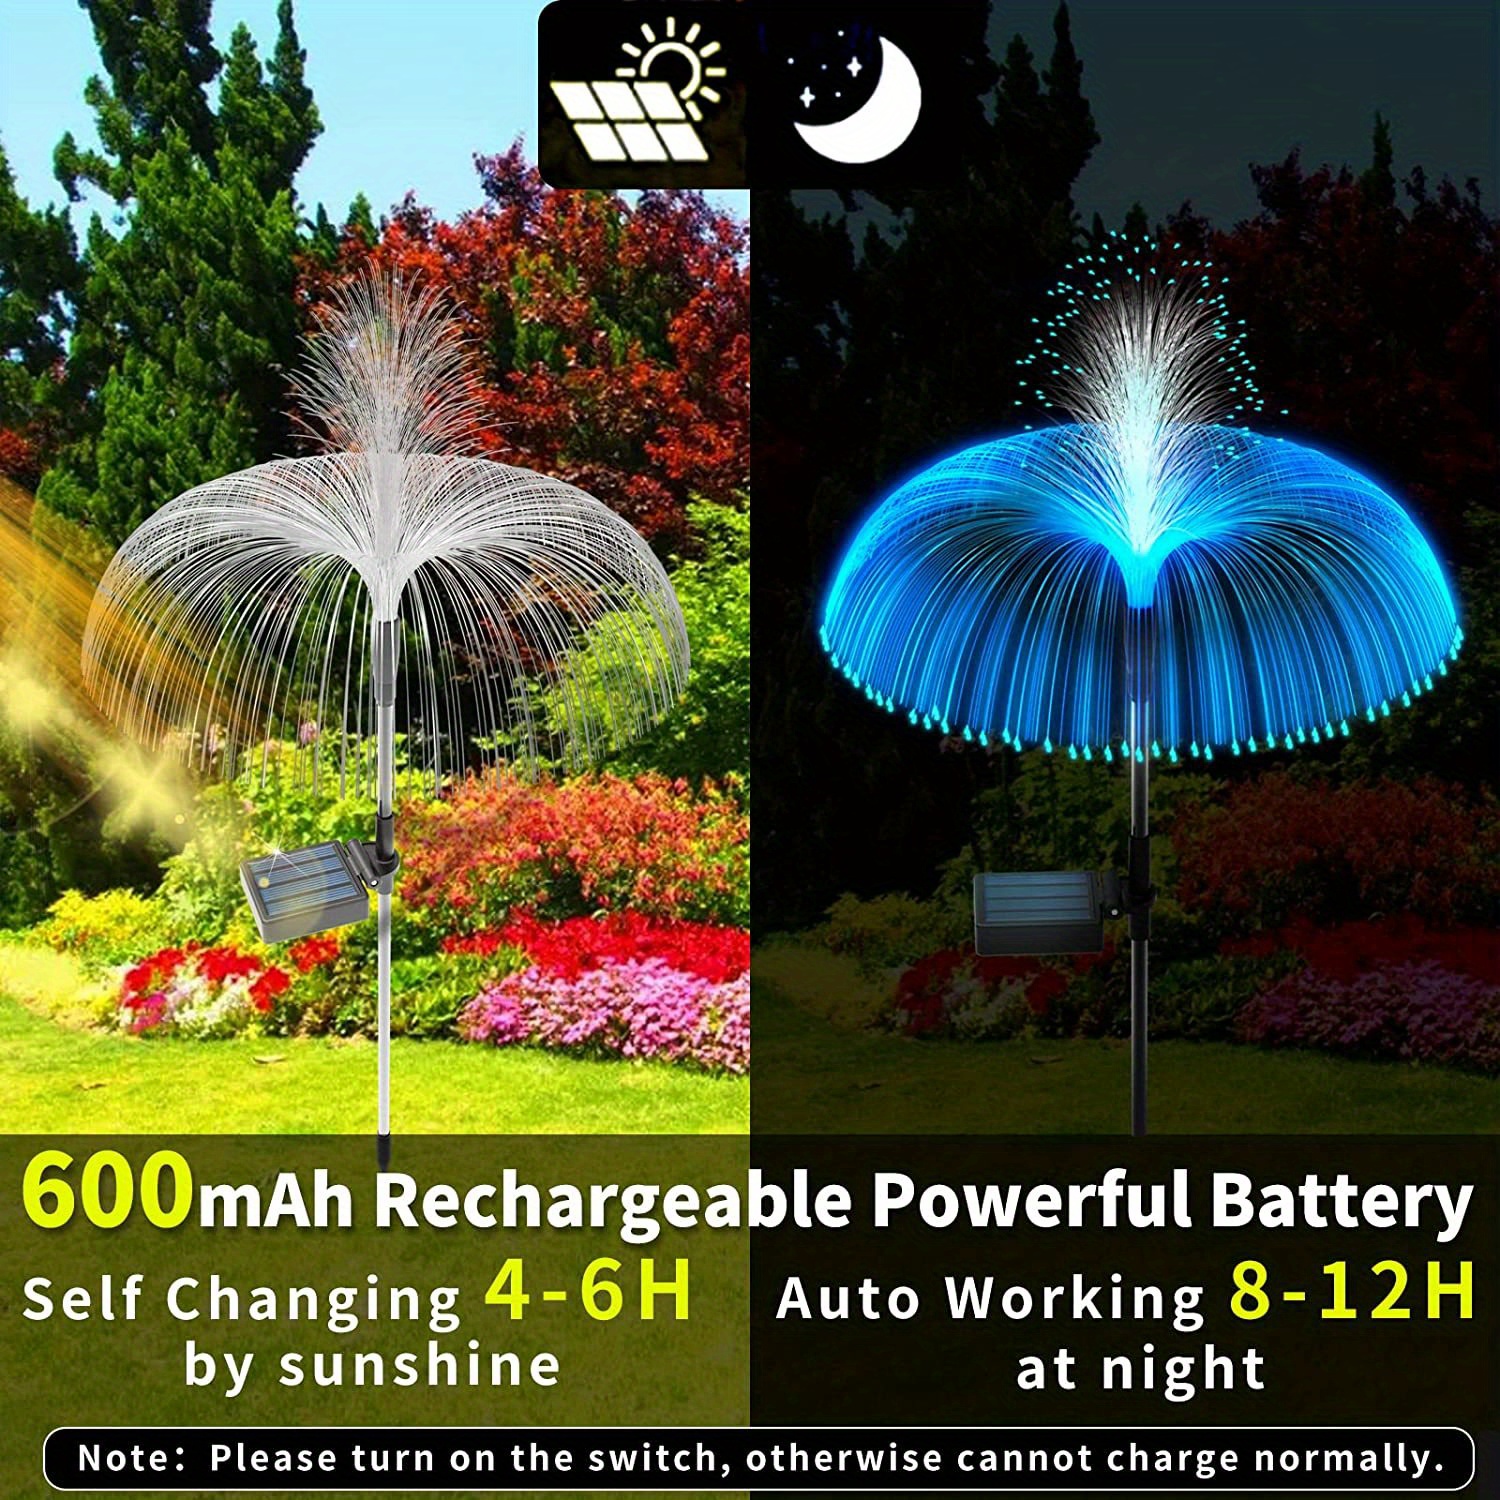 waterproof solar flower fountain lights color changing solar yard light outside decorations solar garden lights stake decor for pathway patio lawn party wedding holiday birthday details 5